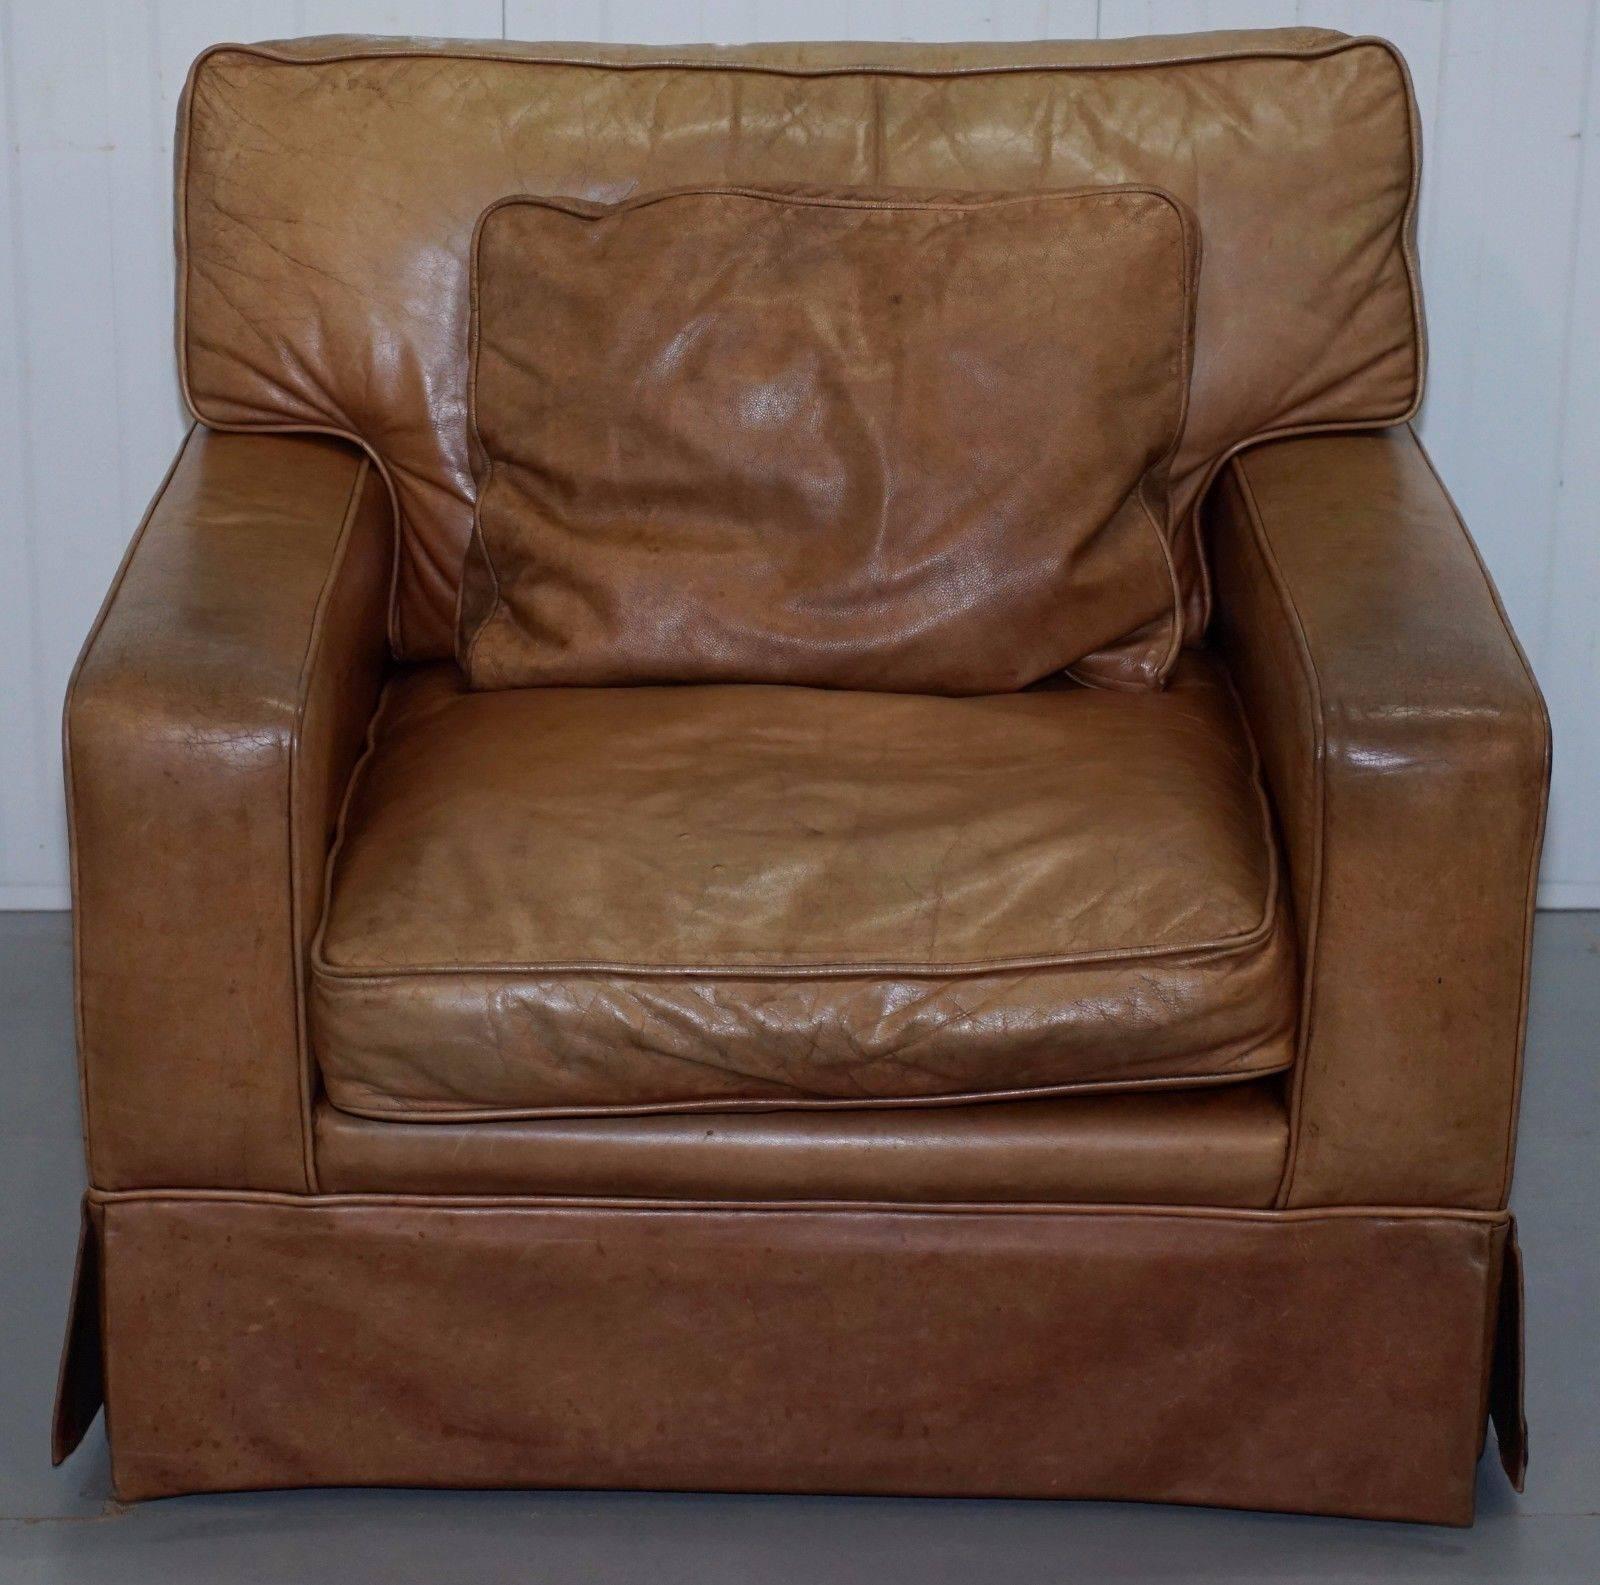 We are delighted to offer for sale this well used vintage pair of aged hand dyed brown leather club armchairs

These are nice looking and comfortable armchairs, they are well used and have that vintage distressed patina that seems very much on